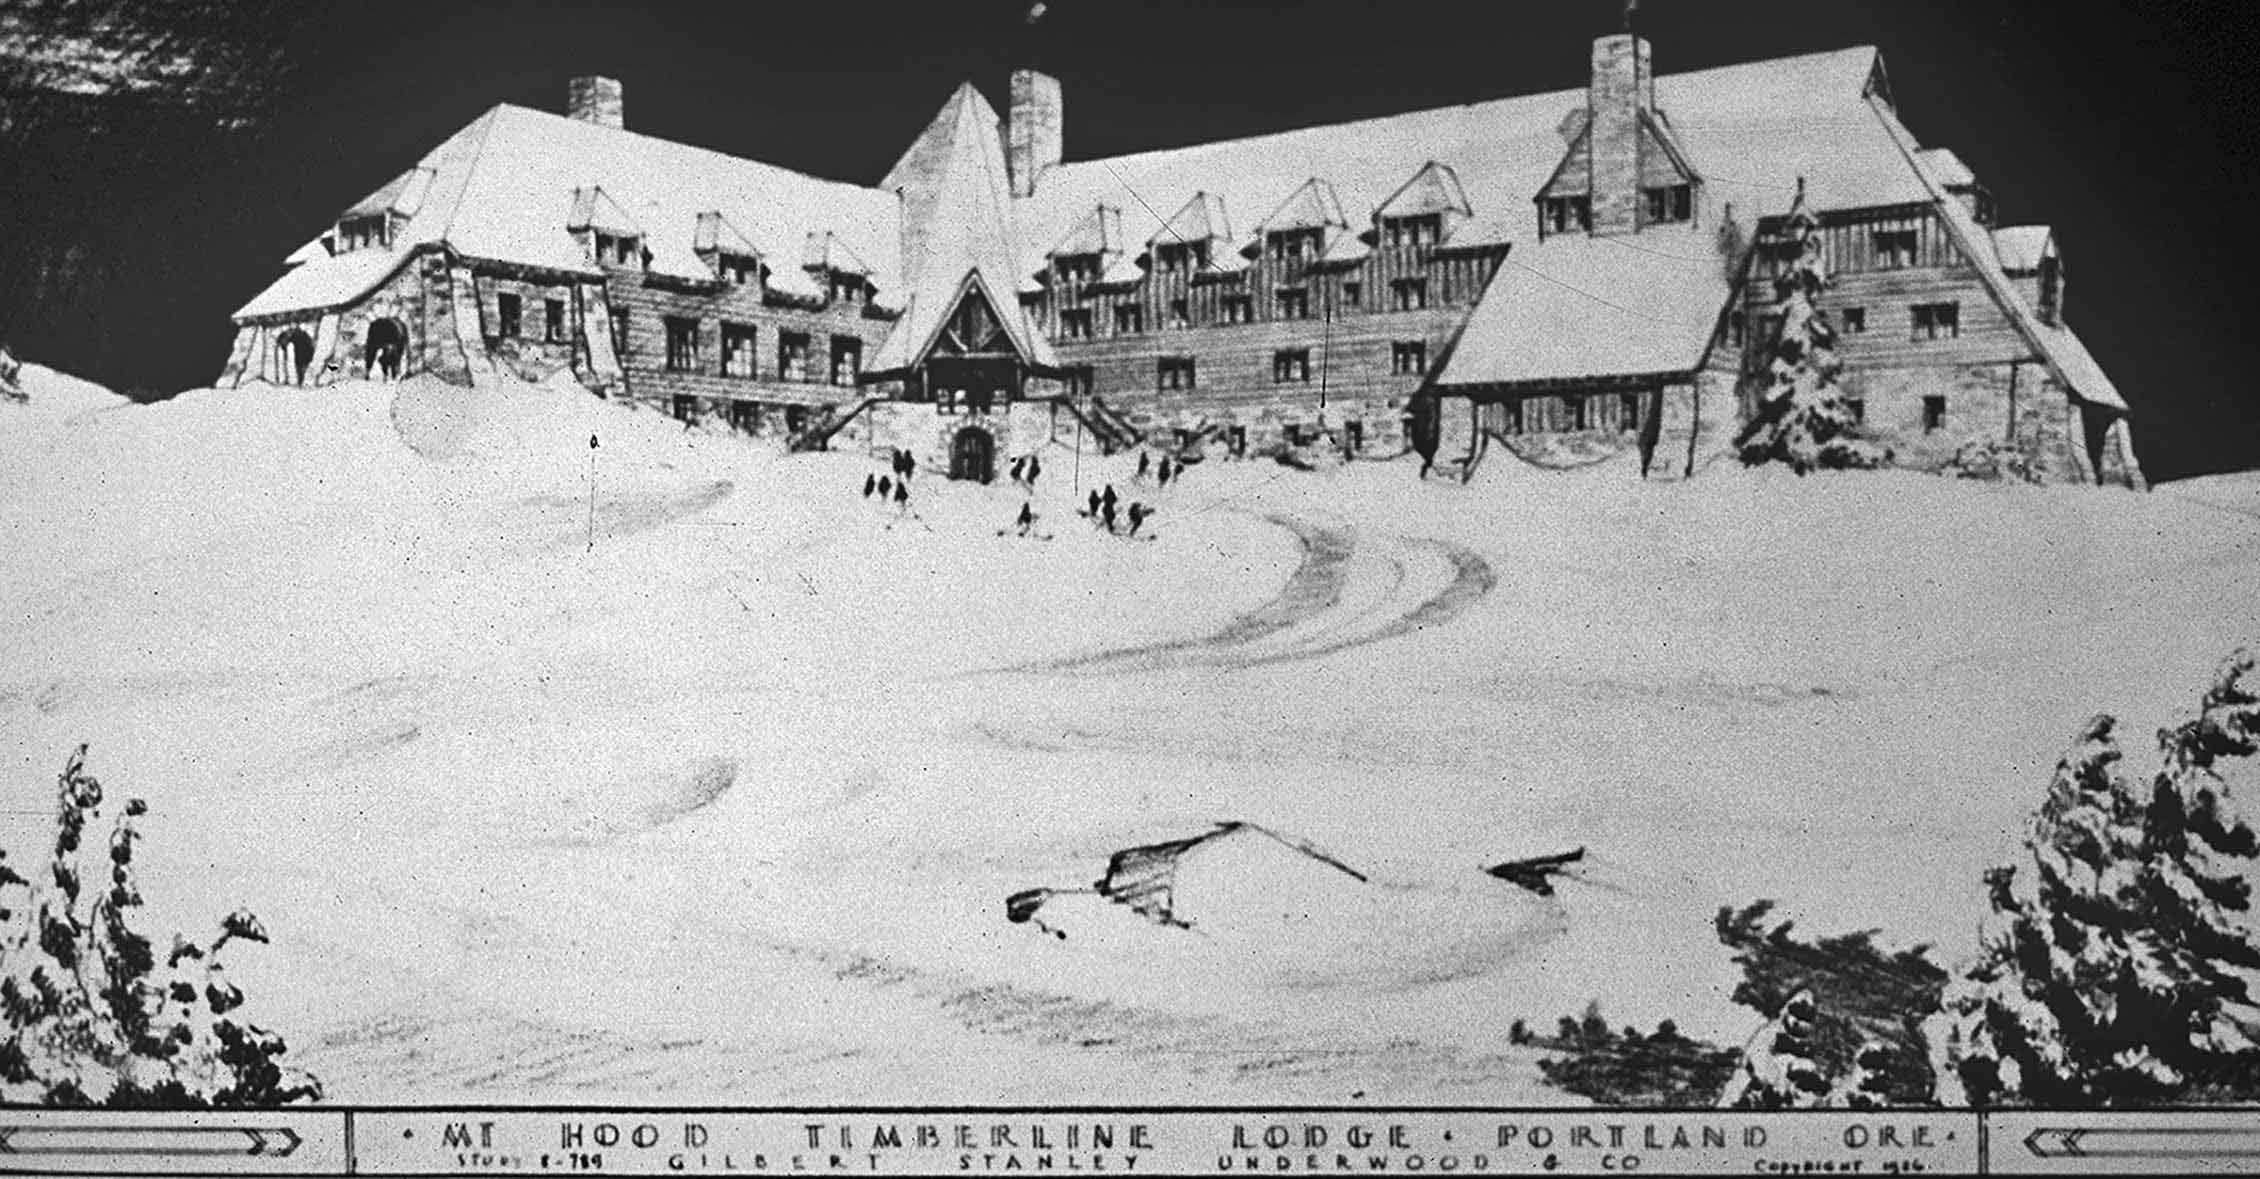 Original drawing of the design of Timberline Lodge